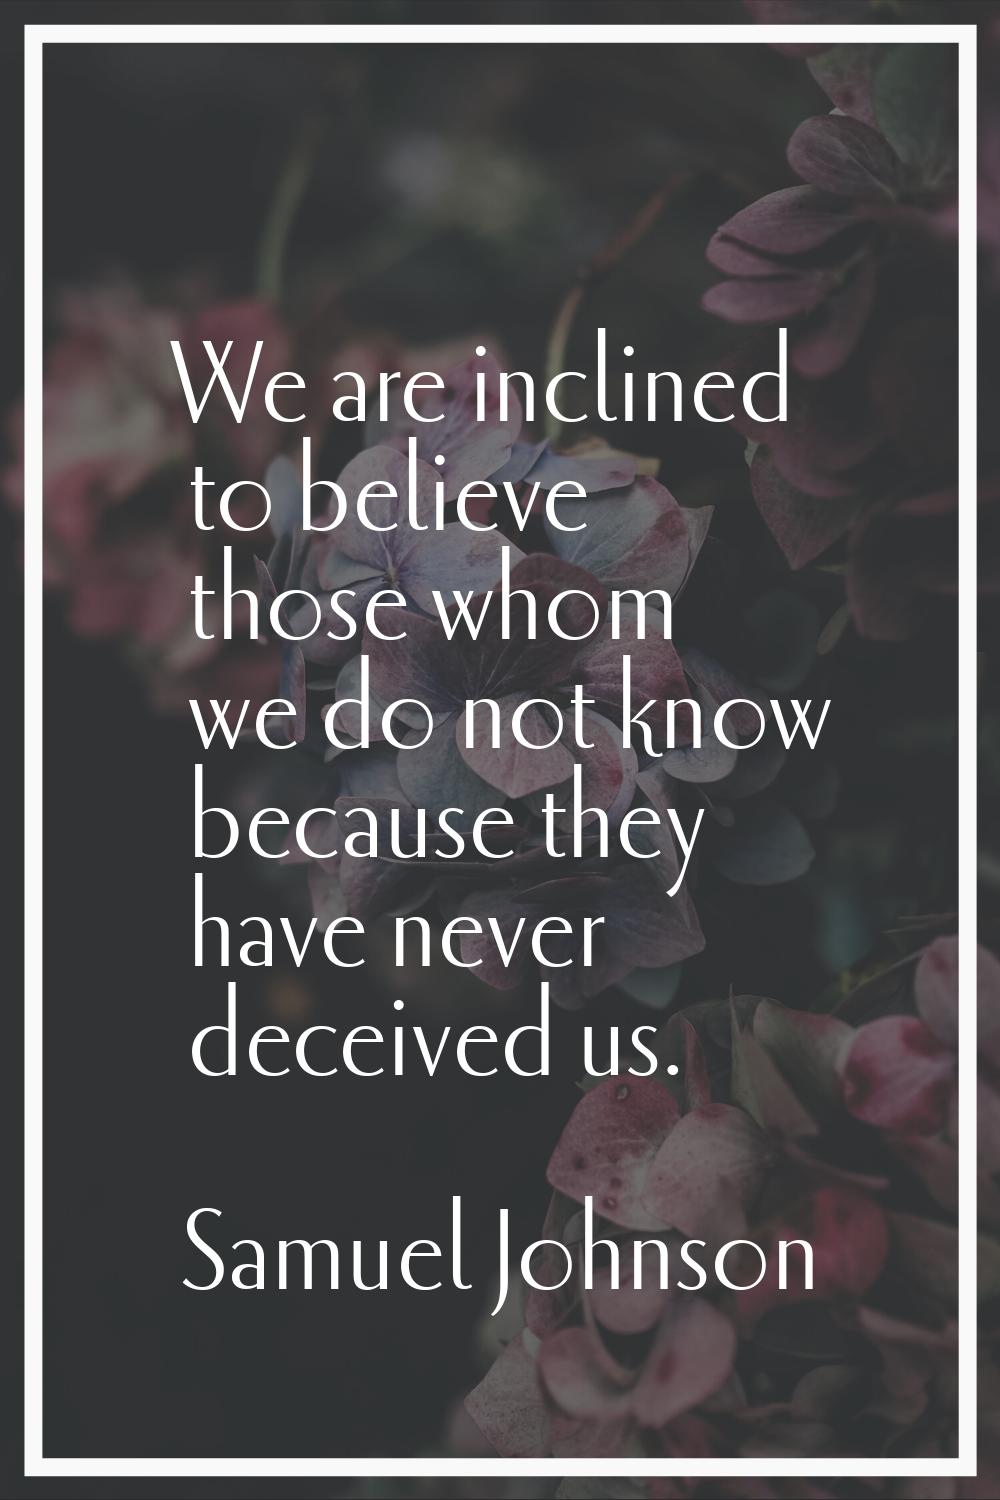 We are inclined to believe those whom we do not know because they have never deceived us.